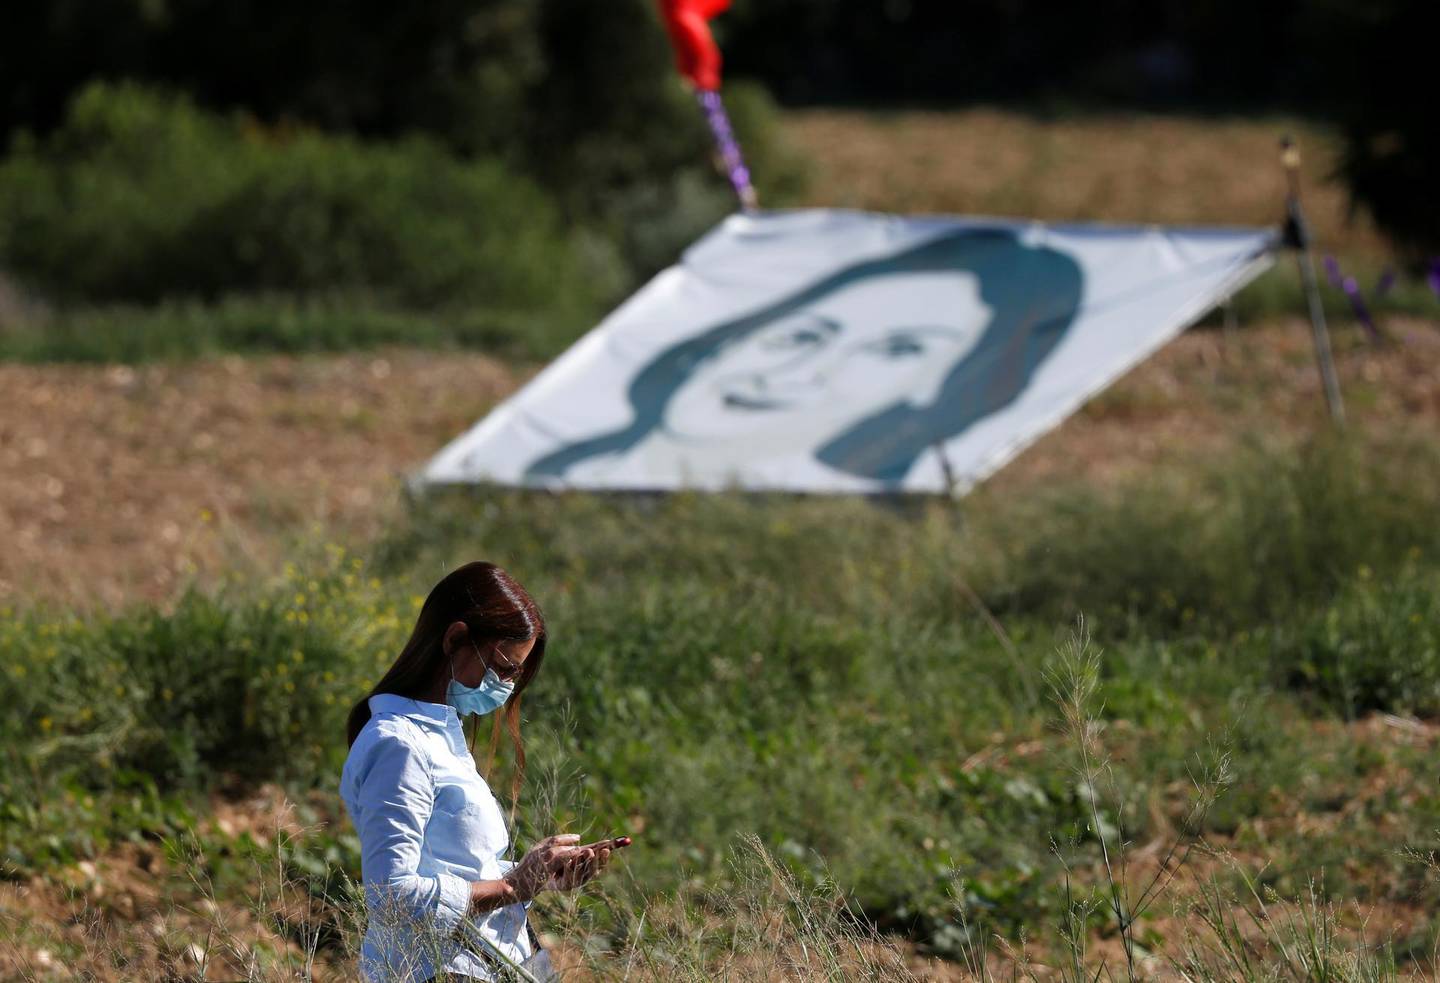 FILE PHOTO: A woman walks past a banner depicting anti-corruption journalist Daphne Caruana Galizia during a commemoration at the site where the journalist was assassinated with a car bomb in 2017, in Bidnija, Malta, October 16, 2020. REUTERS/Darrin Zammit Lupi/File Photo